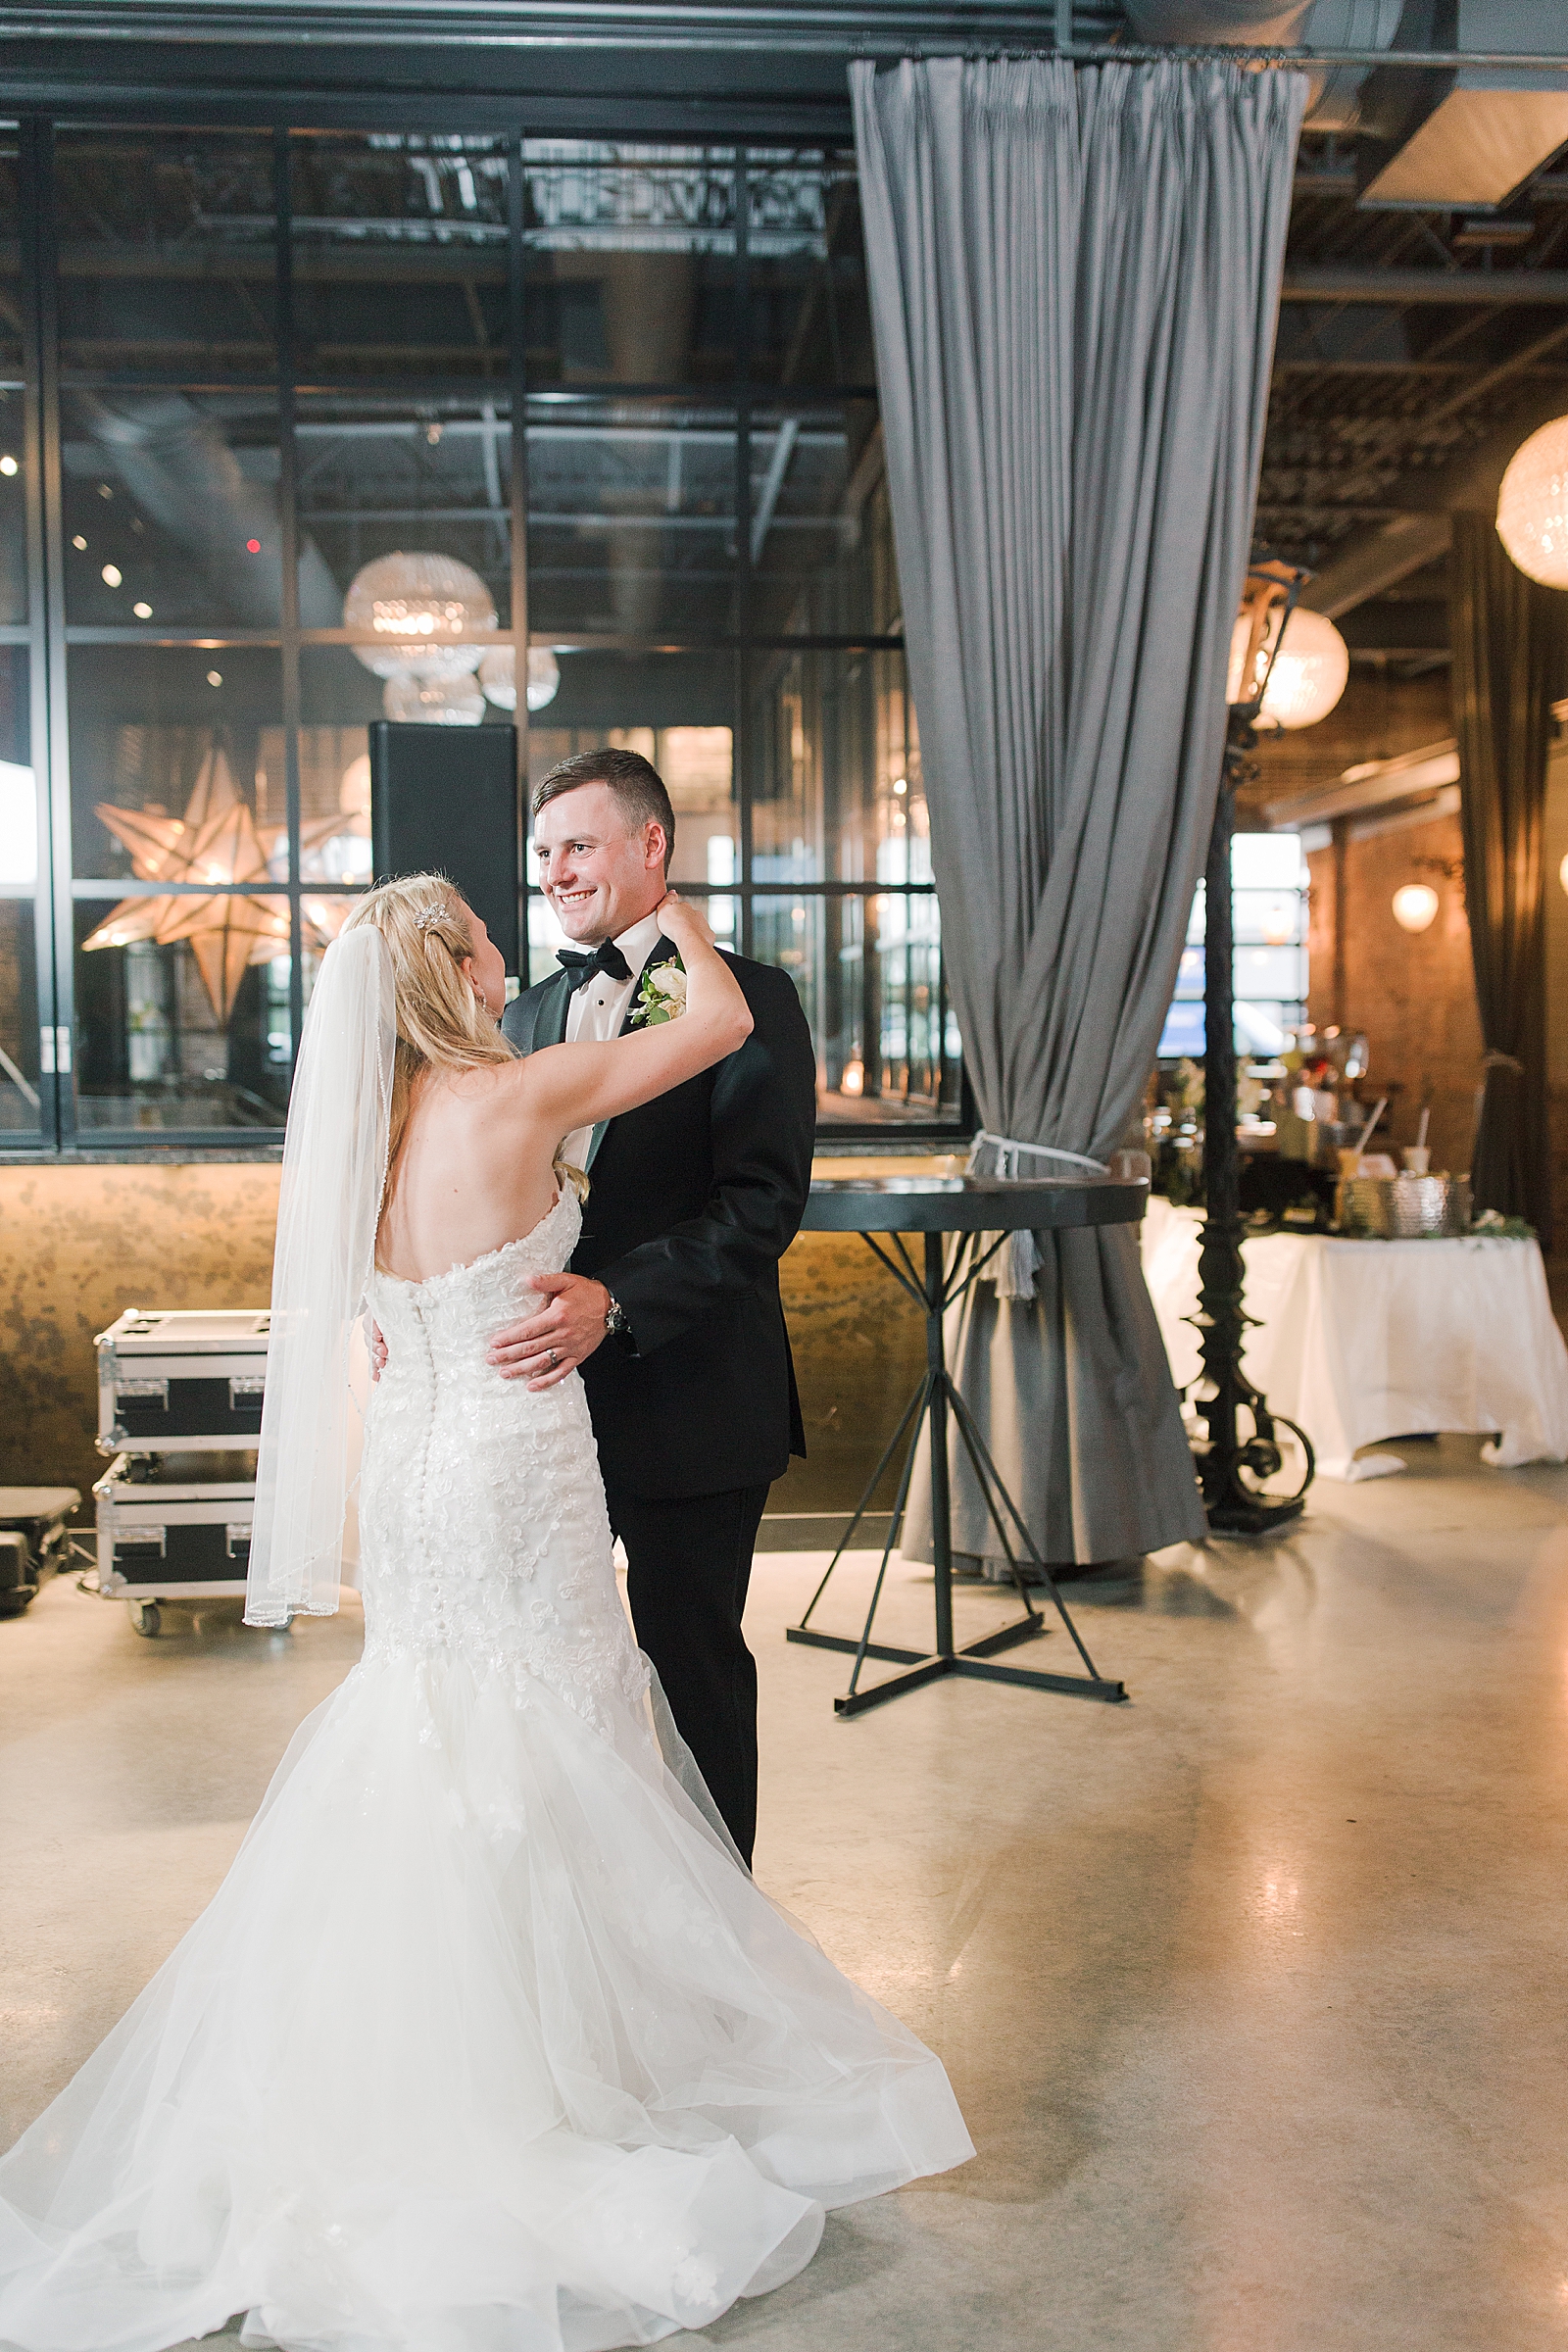 Glover Park Brewery Wedding Reception Bride and Groom First Dance Photo